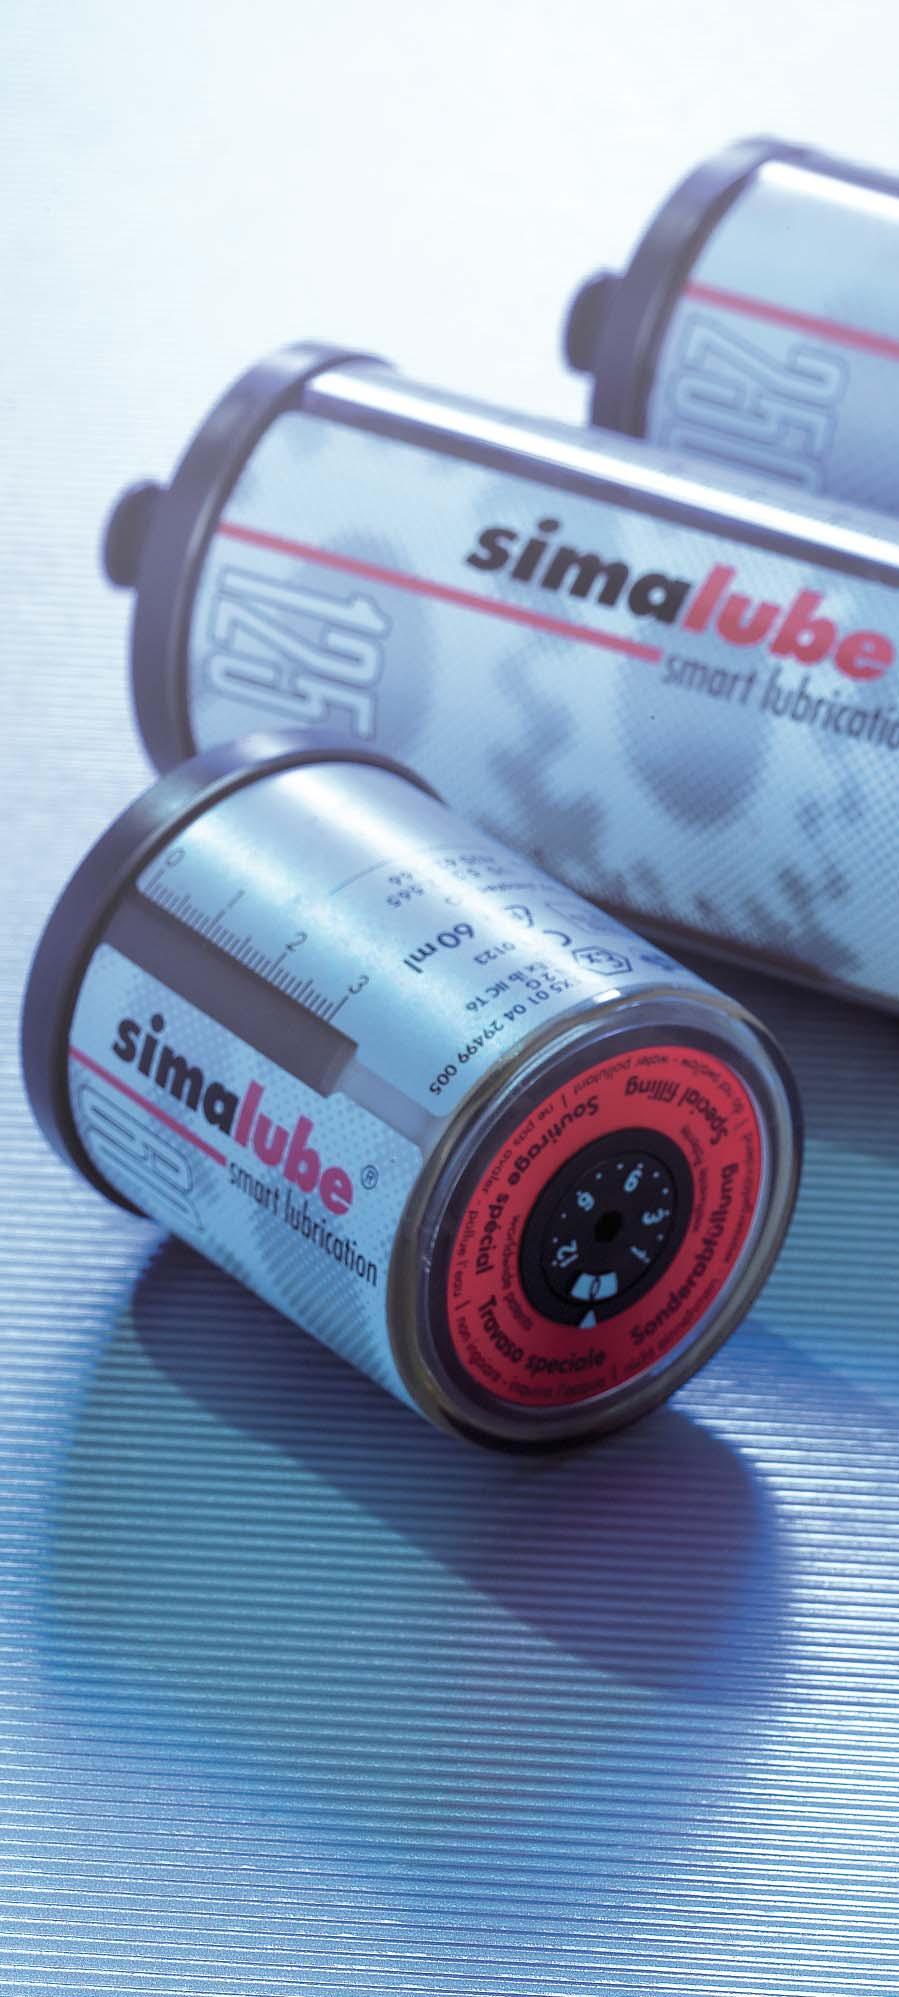 simalube, the compact lubricator that is economical, universally adaptable, and a friend to our environment.